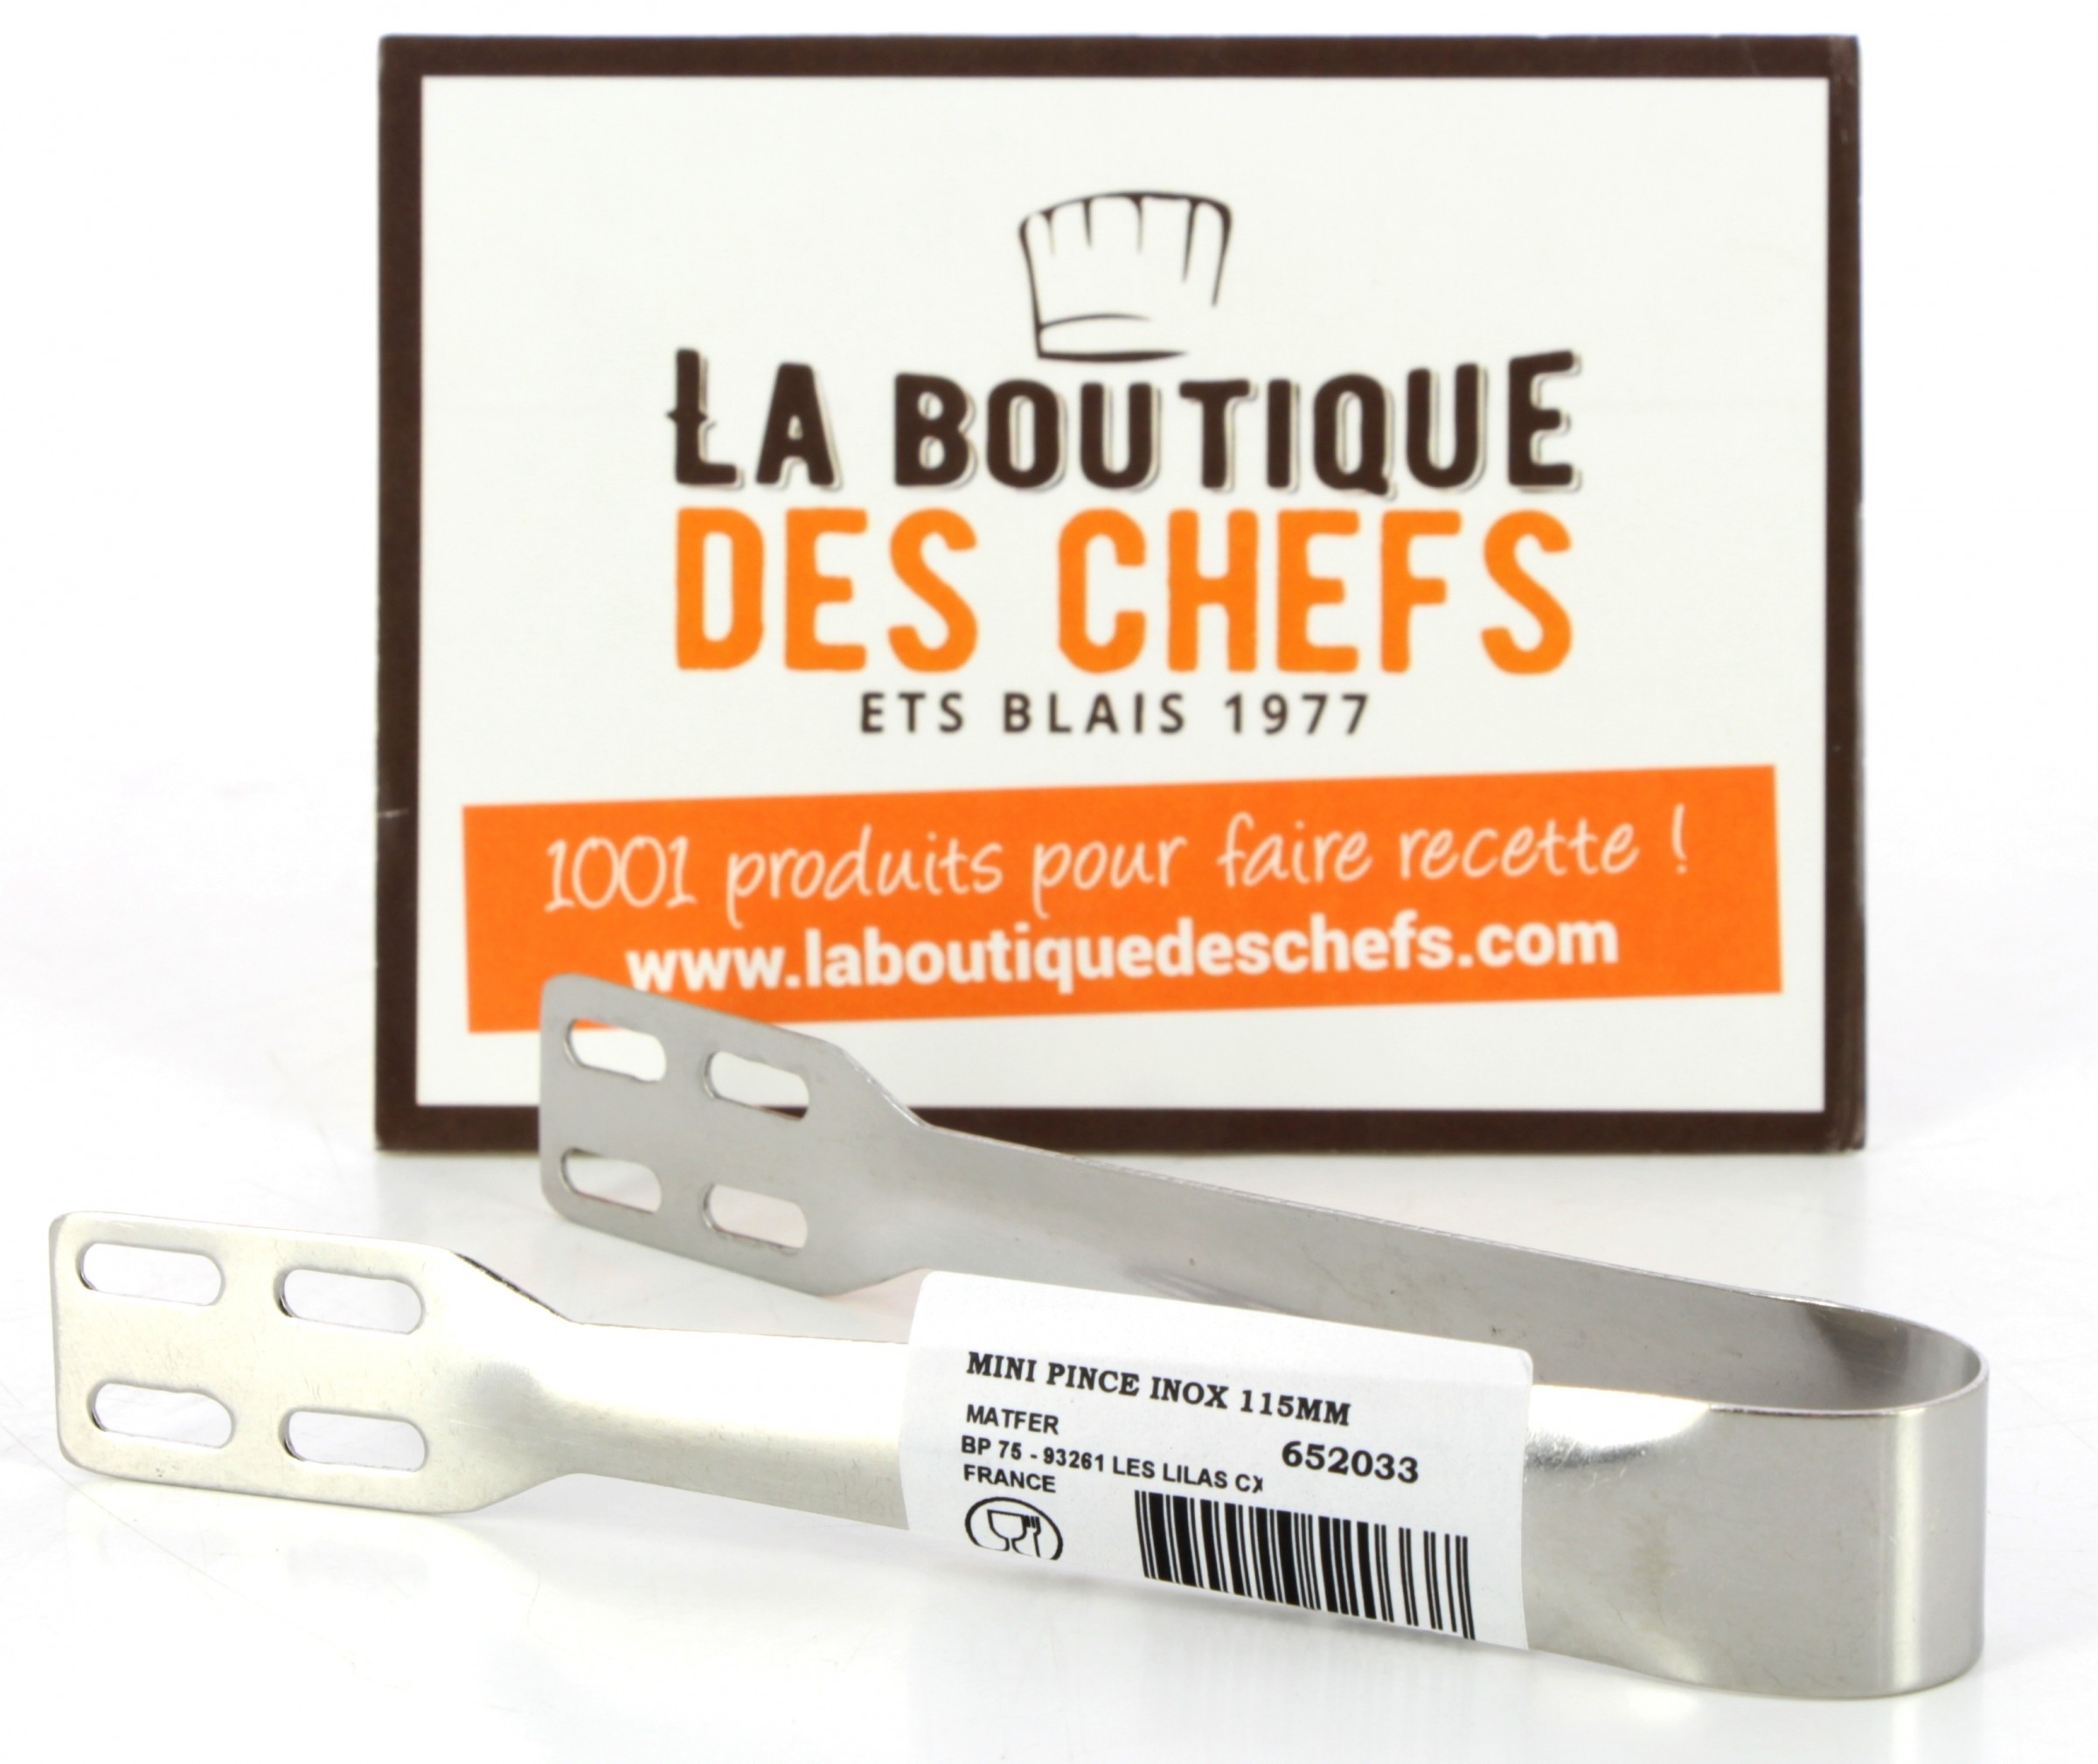 Pince plat chaud inox - Ustensiles pour le four